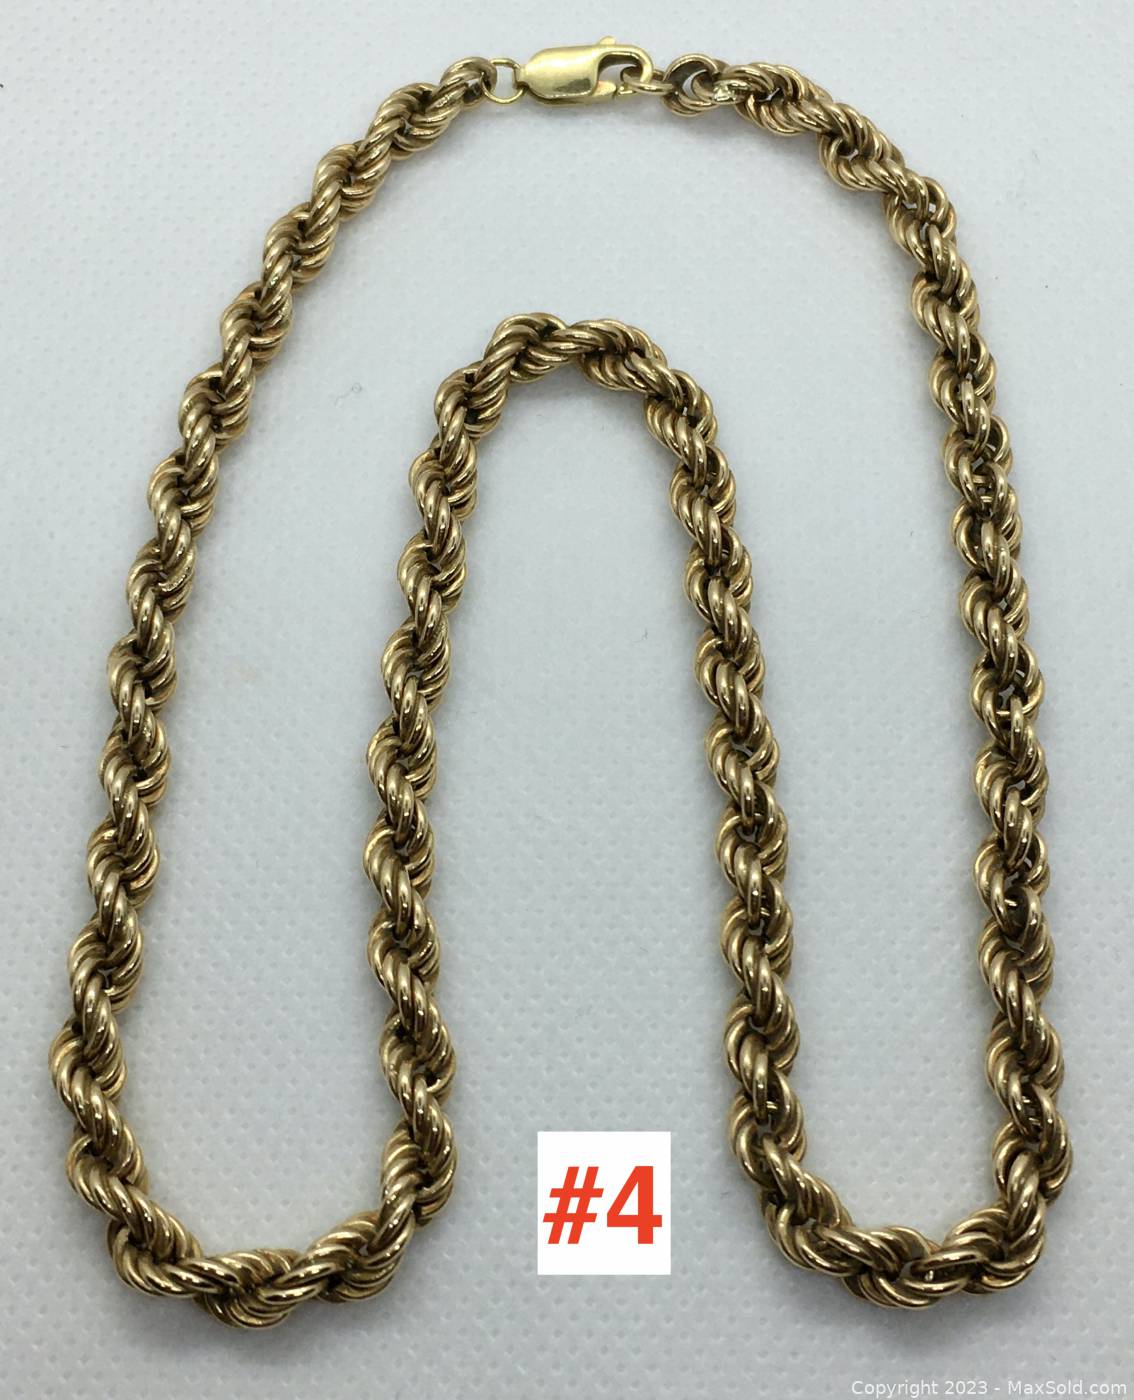 1pc Twisted Rope Chain Necklaces 3mm Stainless Steel Chains Choker Men's  Minimal | eBay